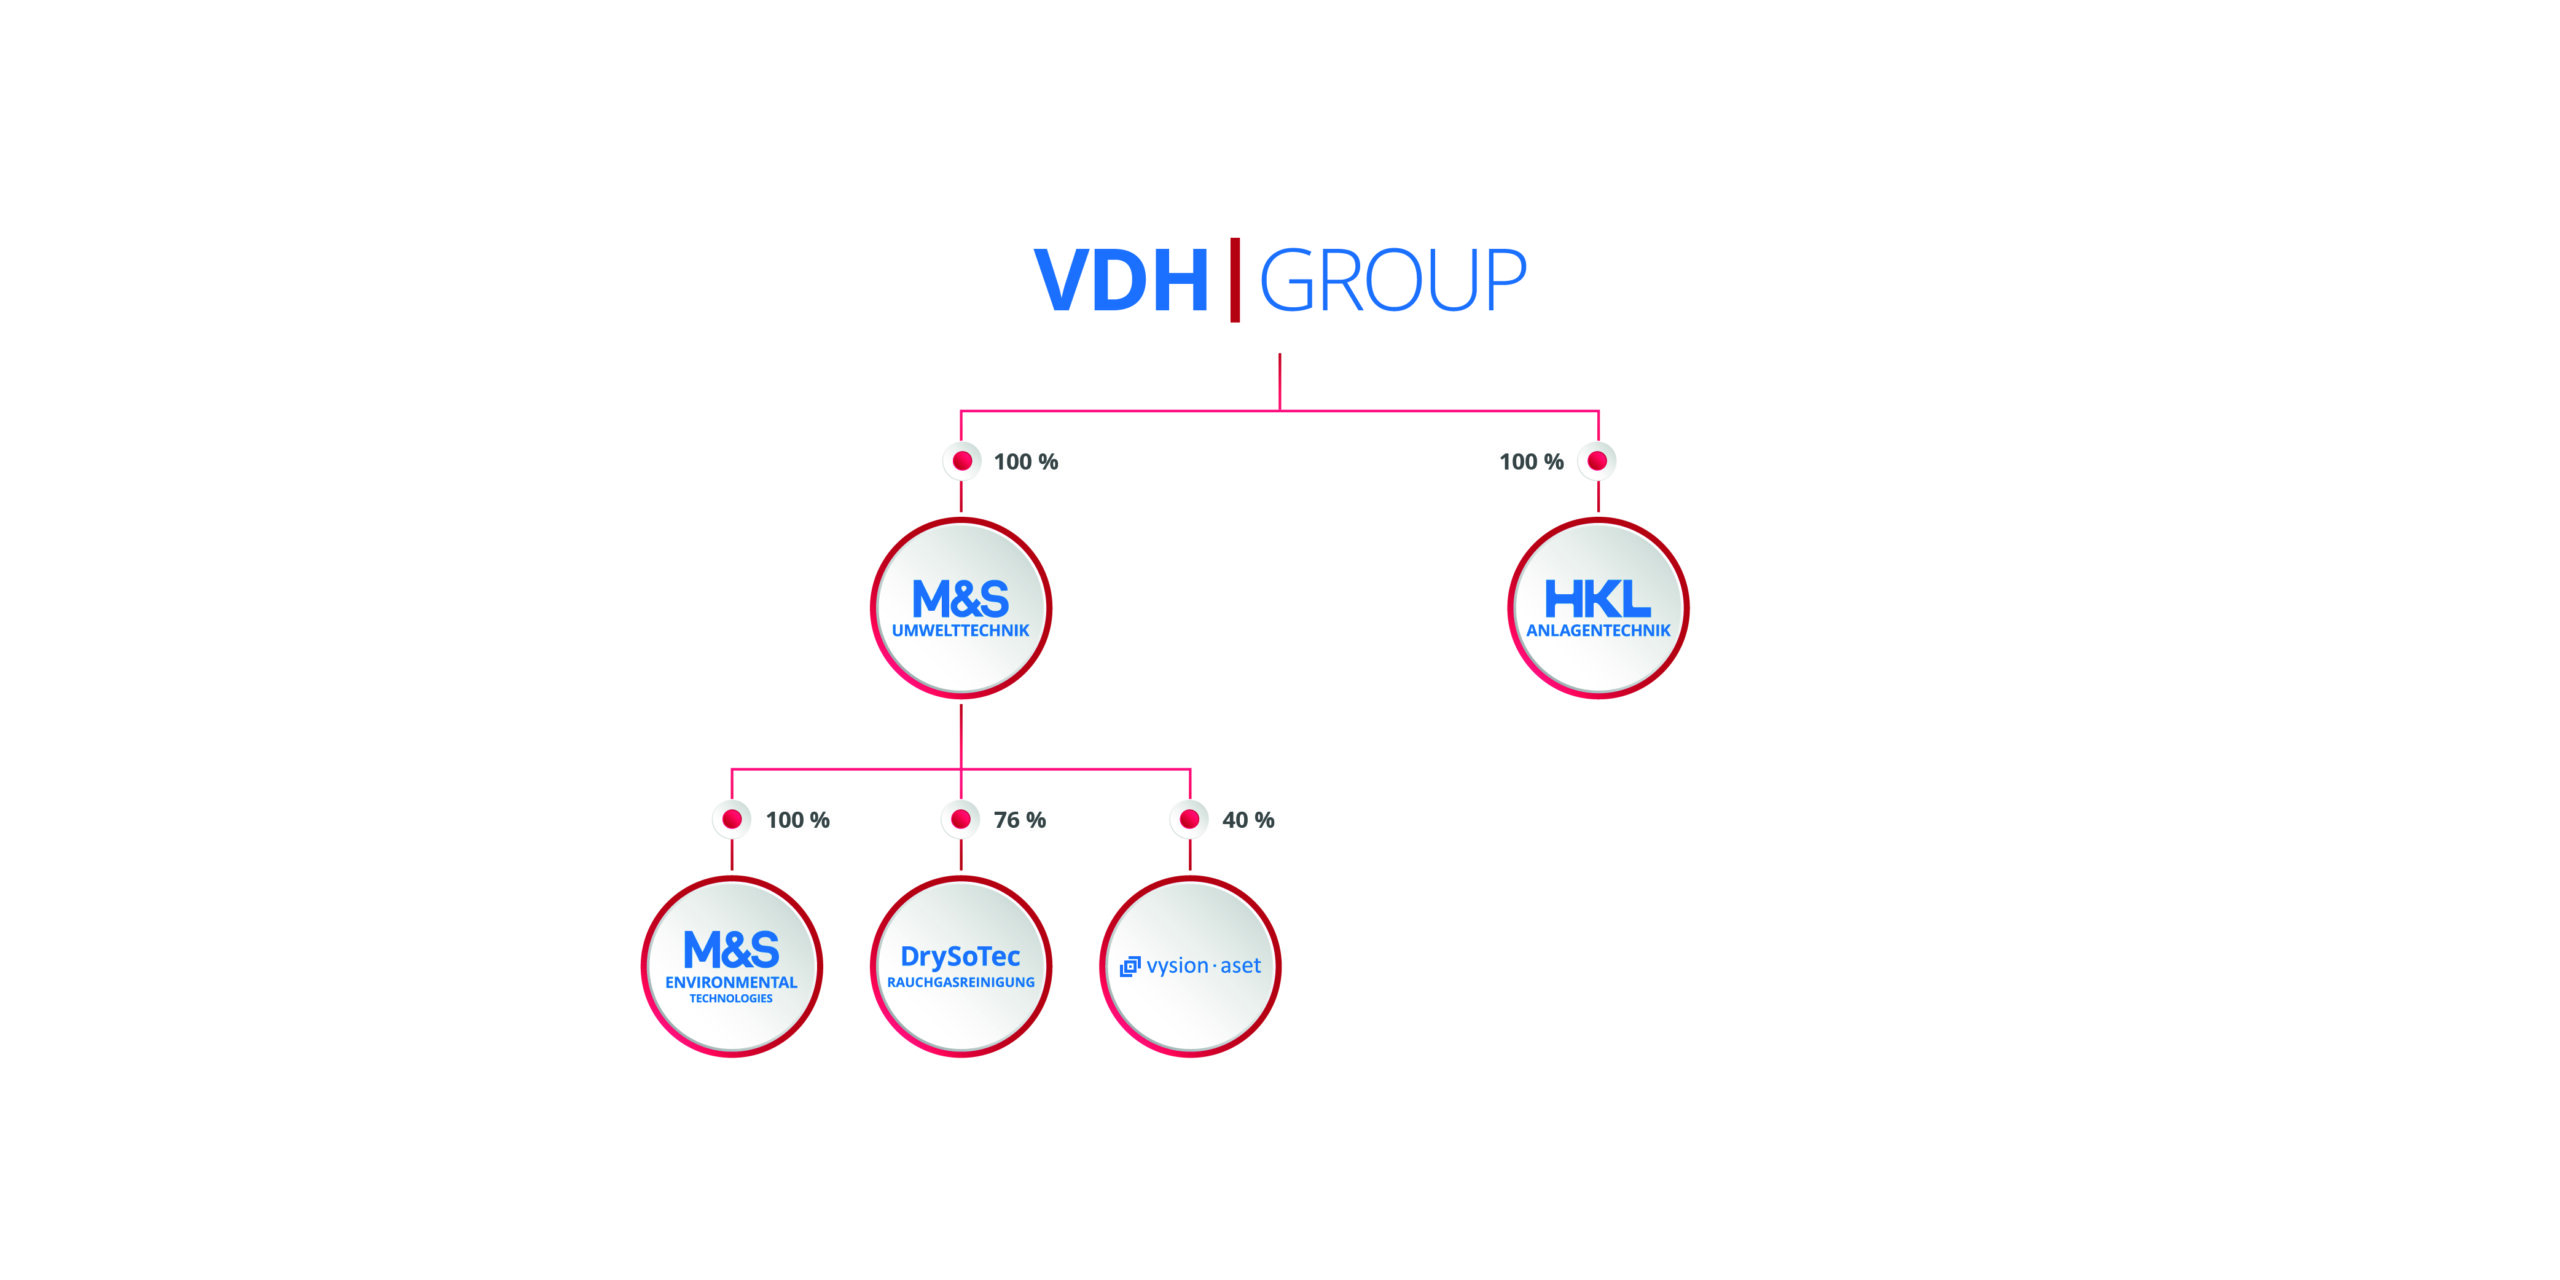 VDH | GROUP Company Structure